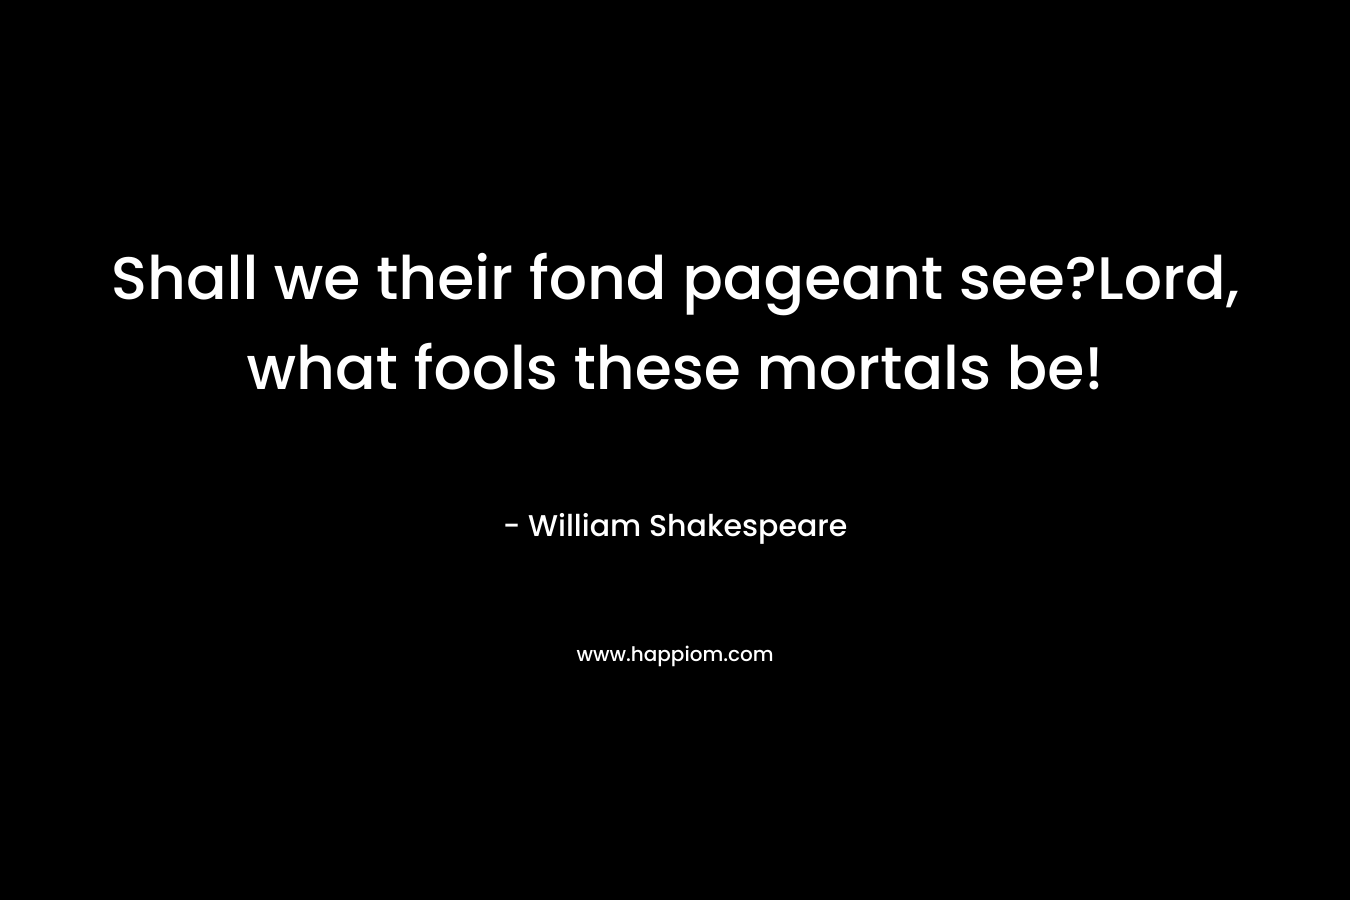 Shall we their fond pageant see?Lord, what fools these mortals be!